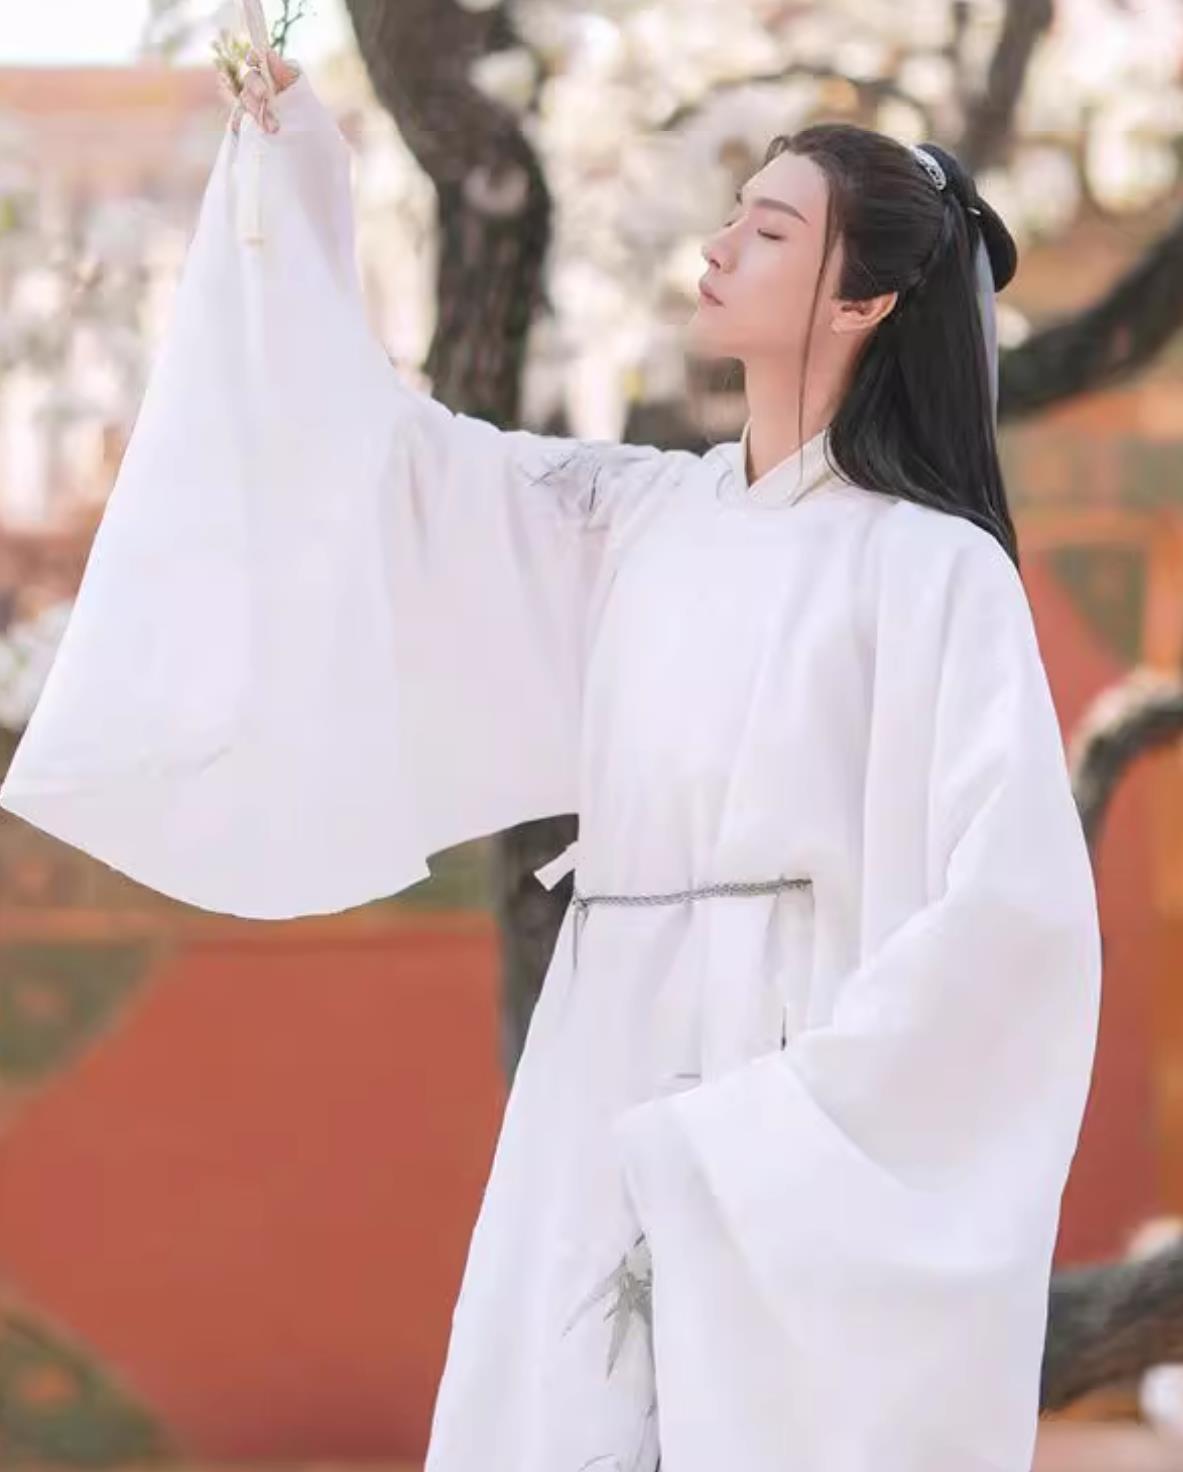 Ancient China Young Childe Clothing China Travel Photography Ming Dynasty Scholar Costume Traditional White Hanfu Robes